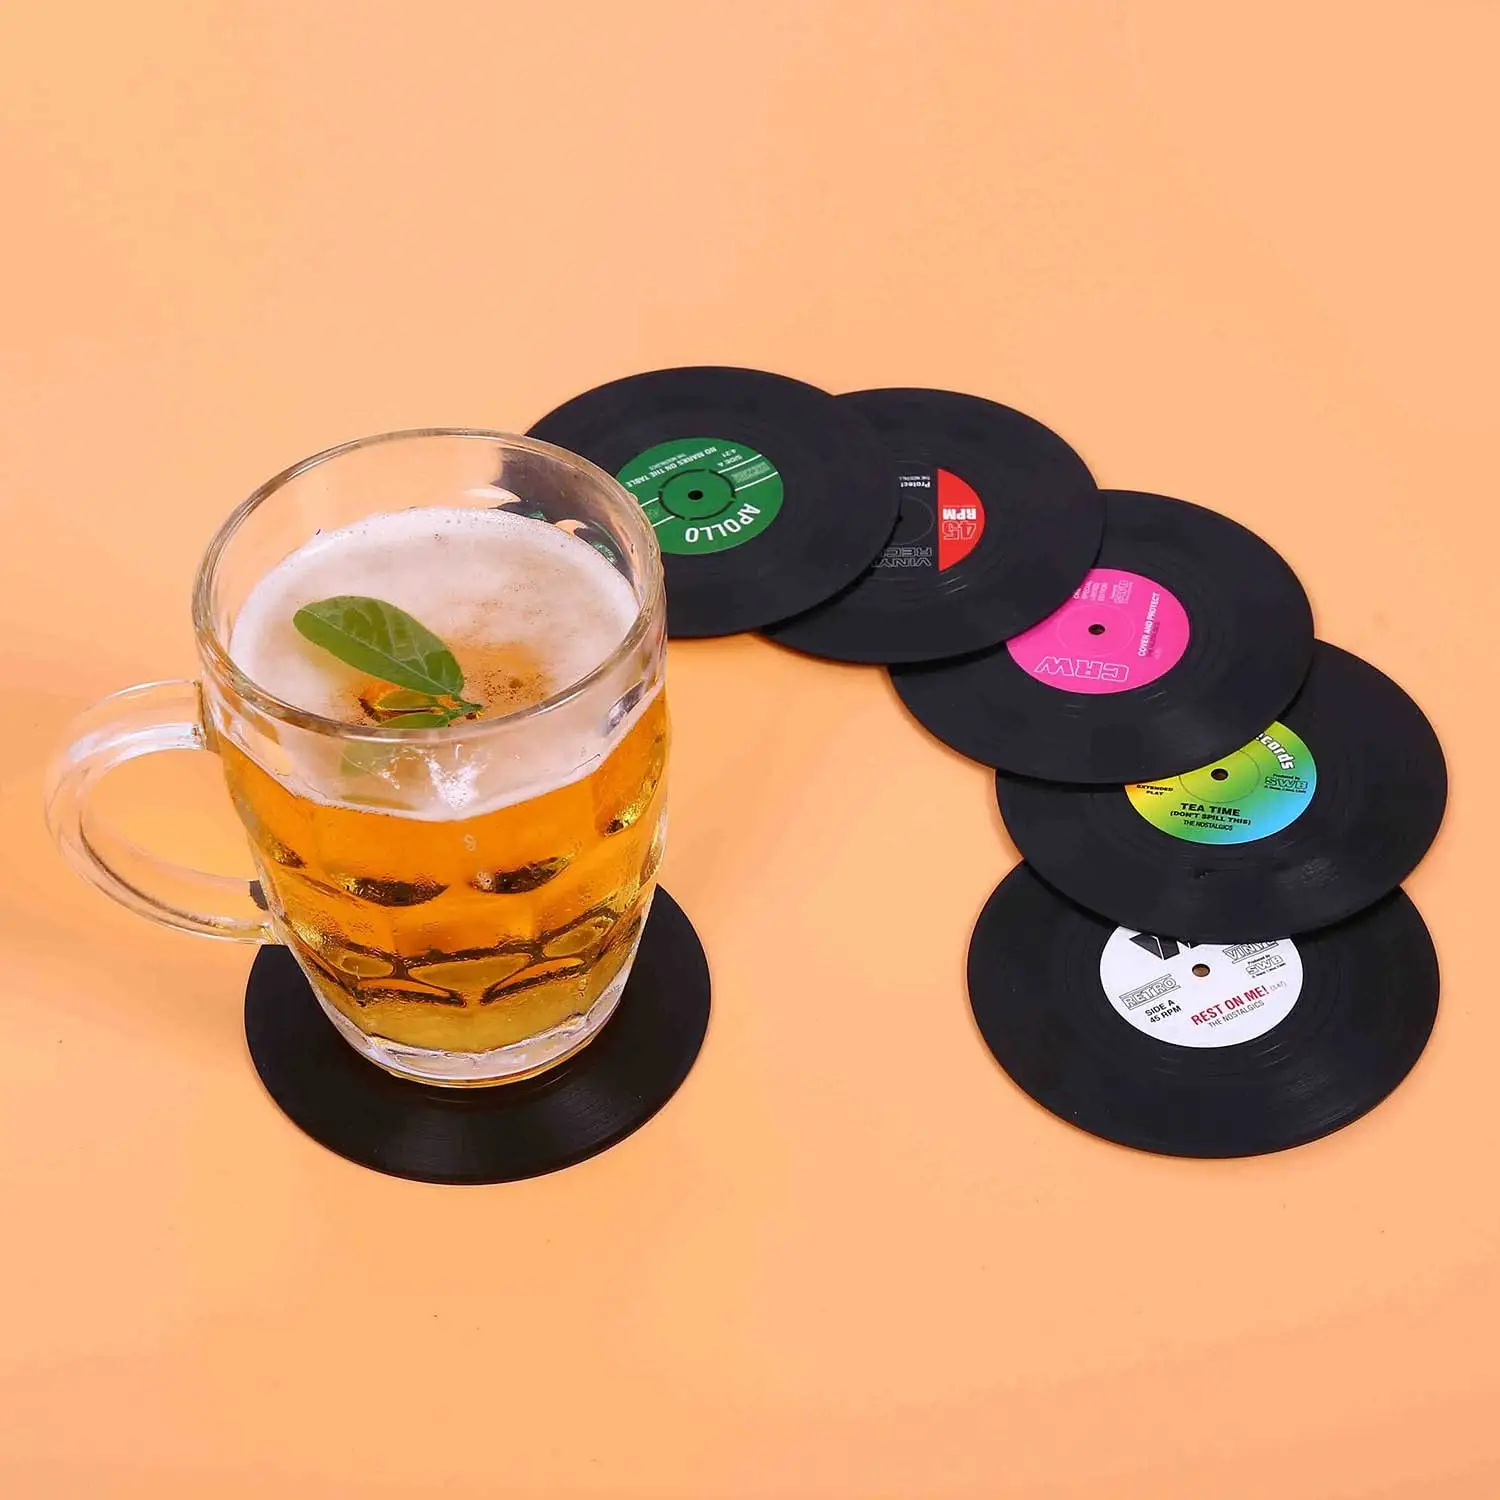 Music Coasters With Vinyl Record Payer Holder for Cups